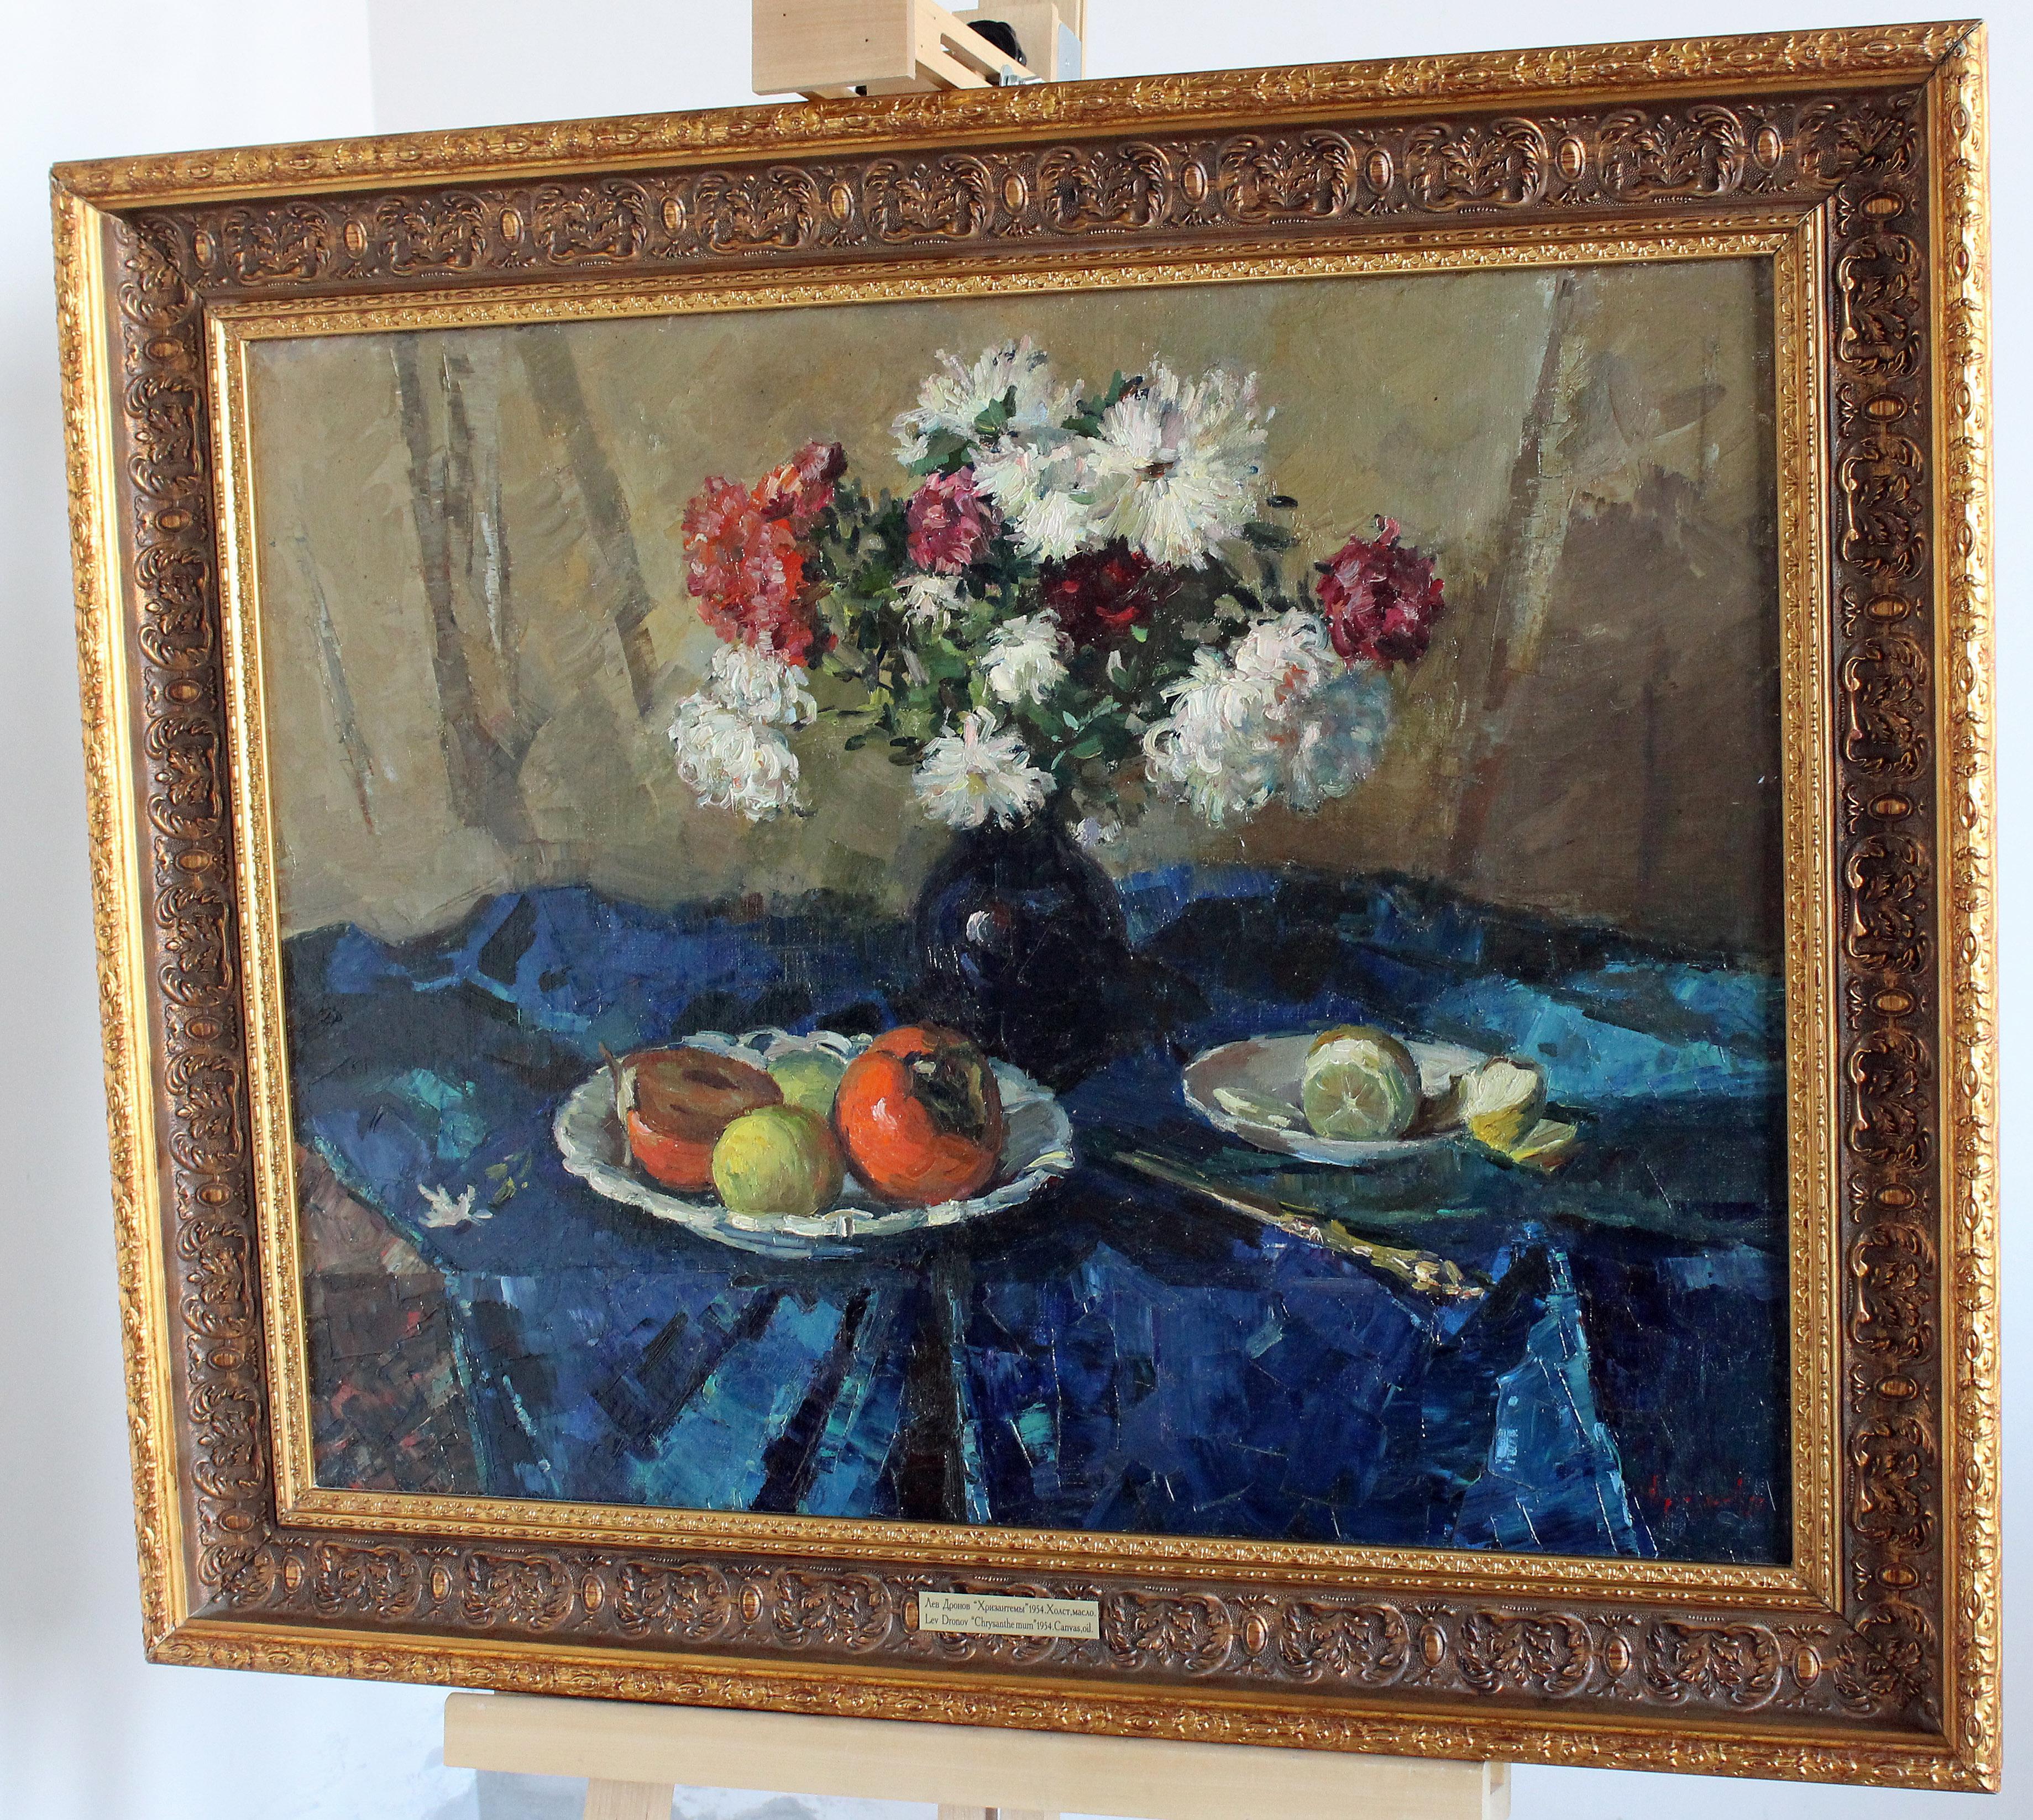 On the plane of the table, covered with blue drapery, there is a vase with Chrysanthemums of white and purple color, practically in the center. The background is a neutral greyish linen canvas. Fruit bowls are in the foreground.
In the plate on the